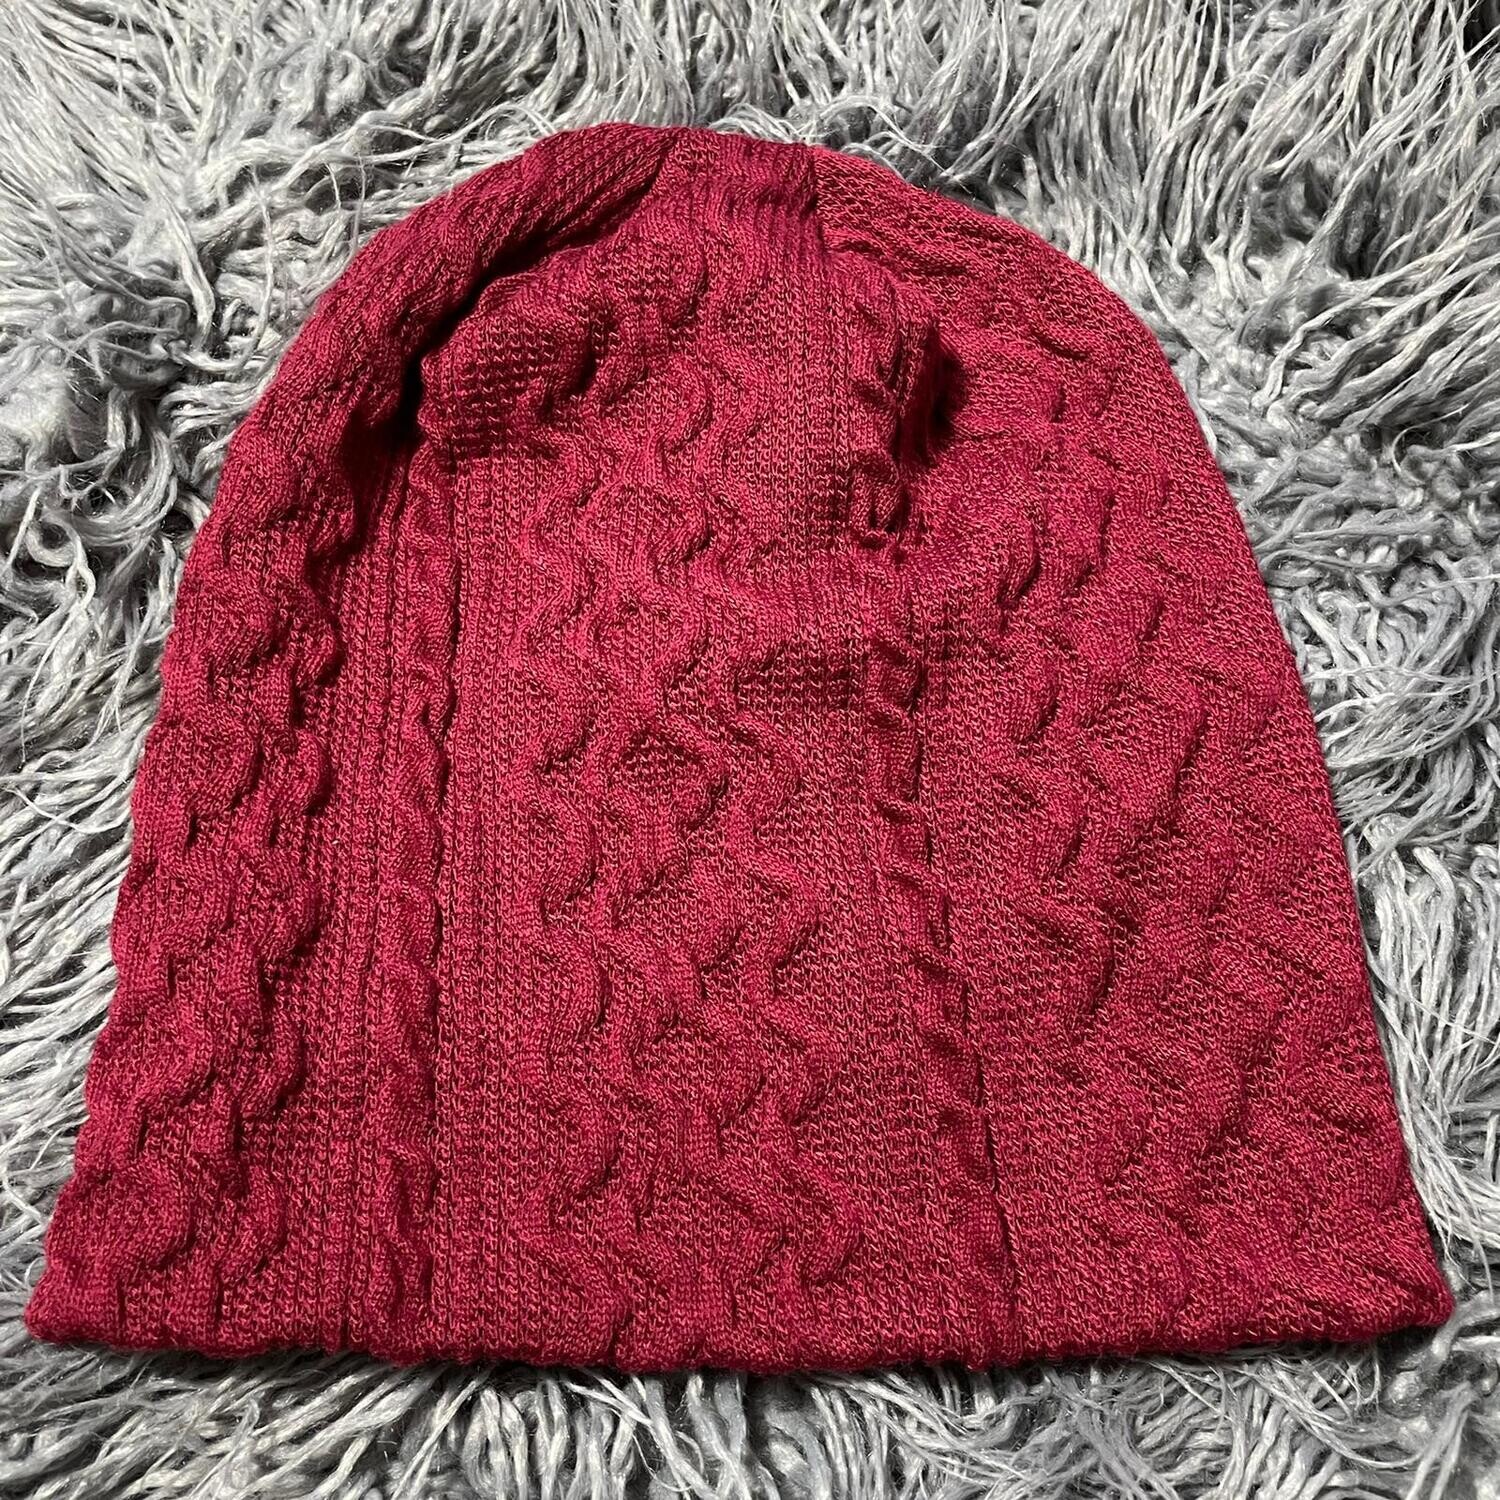 Red cable knit beanie